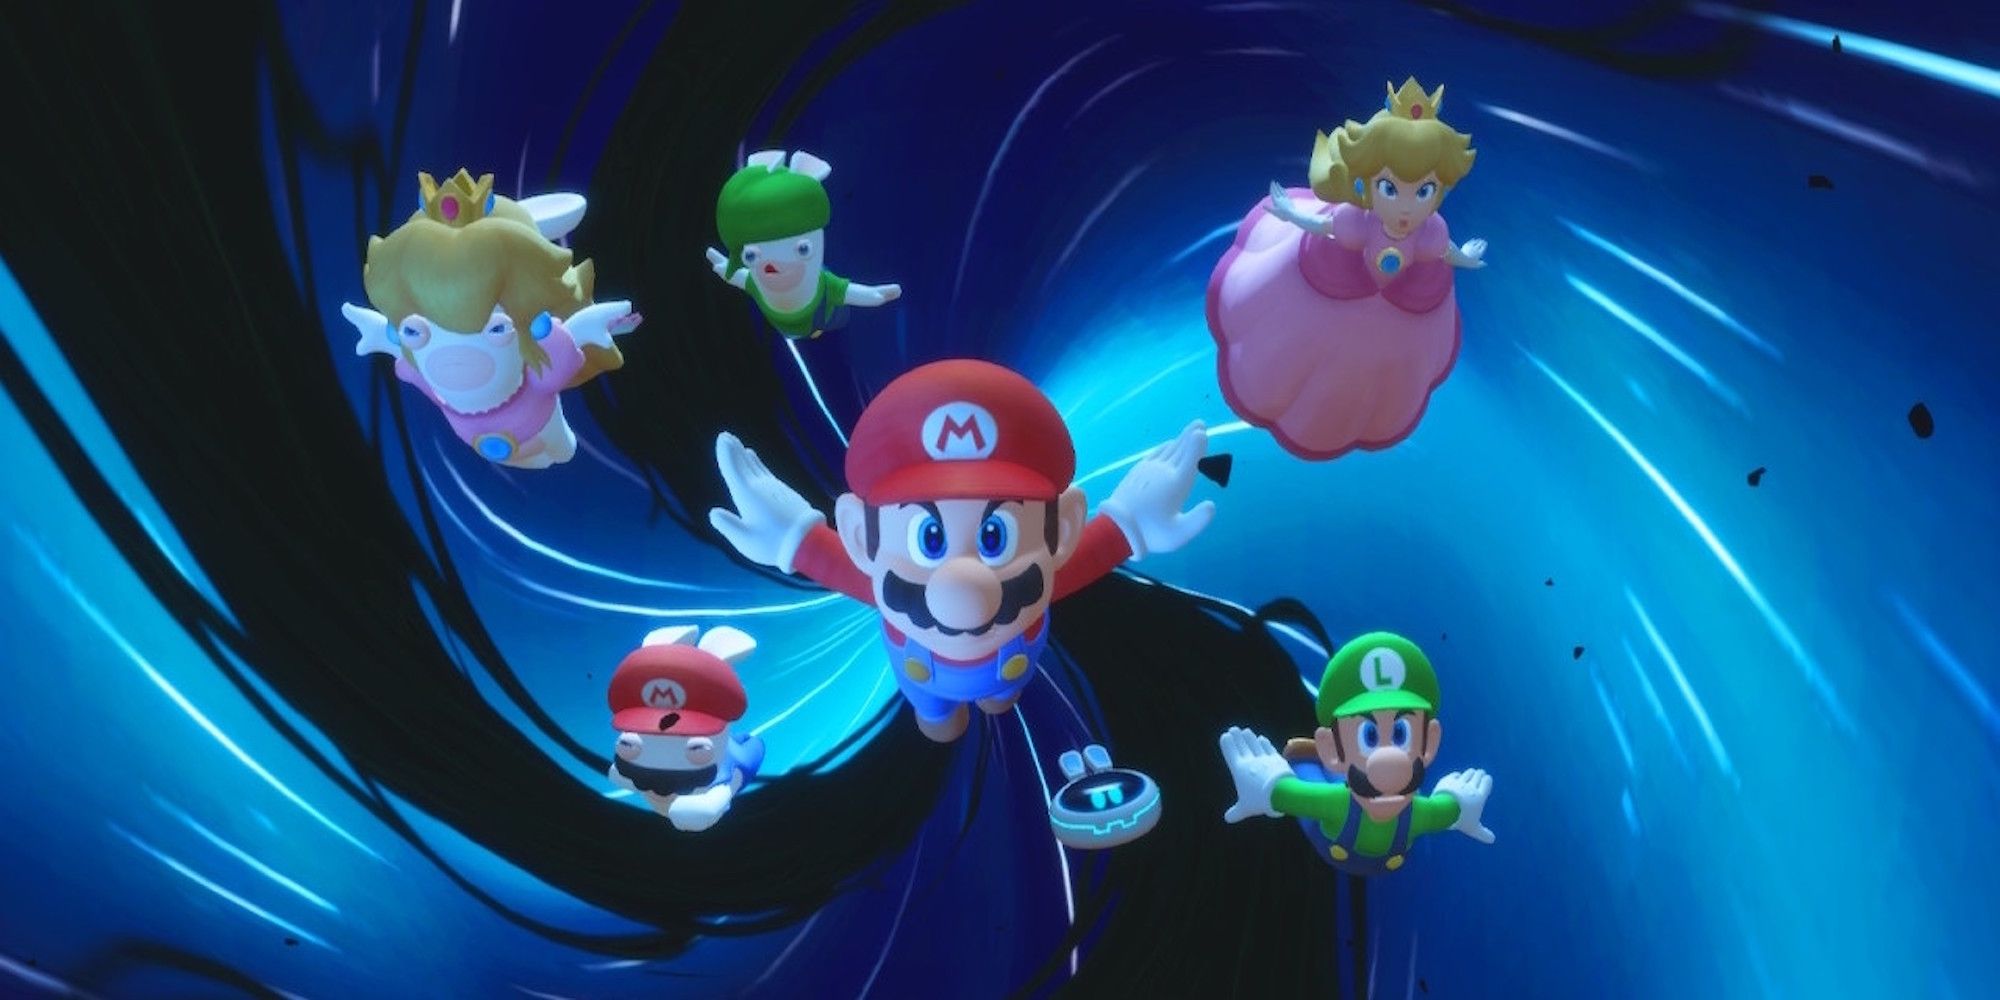 A cutscene featuring characters in Mario + Rabbids Sparks of Hope